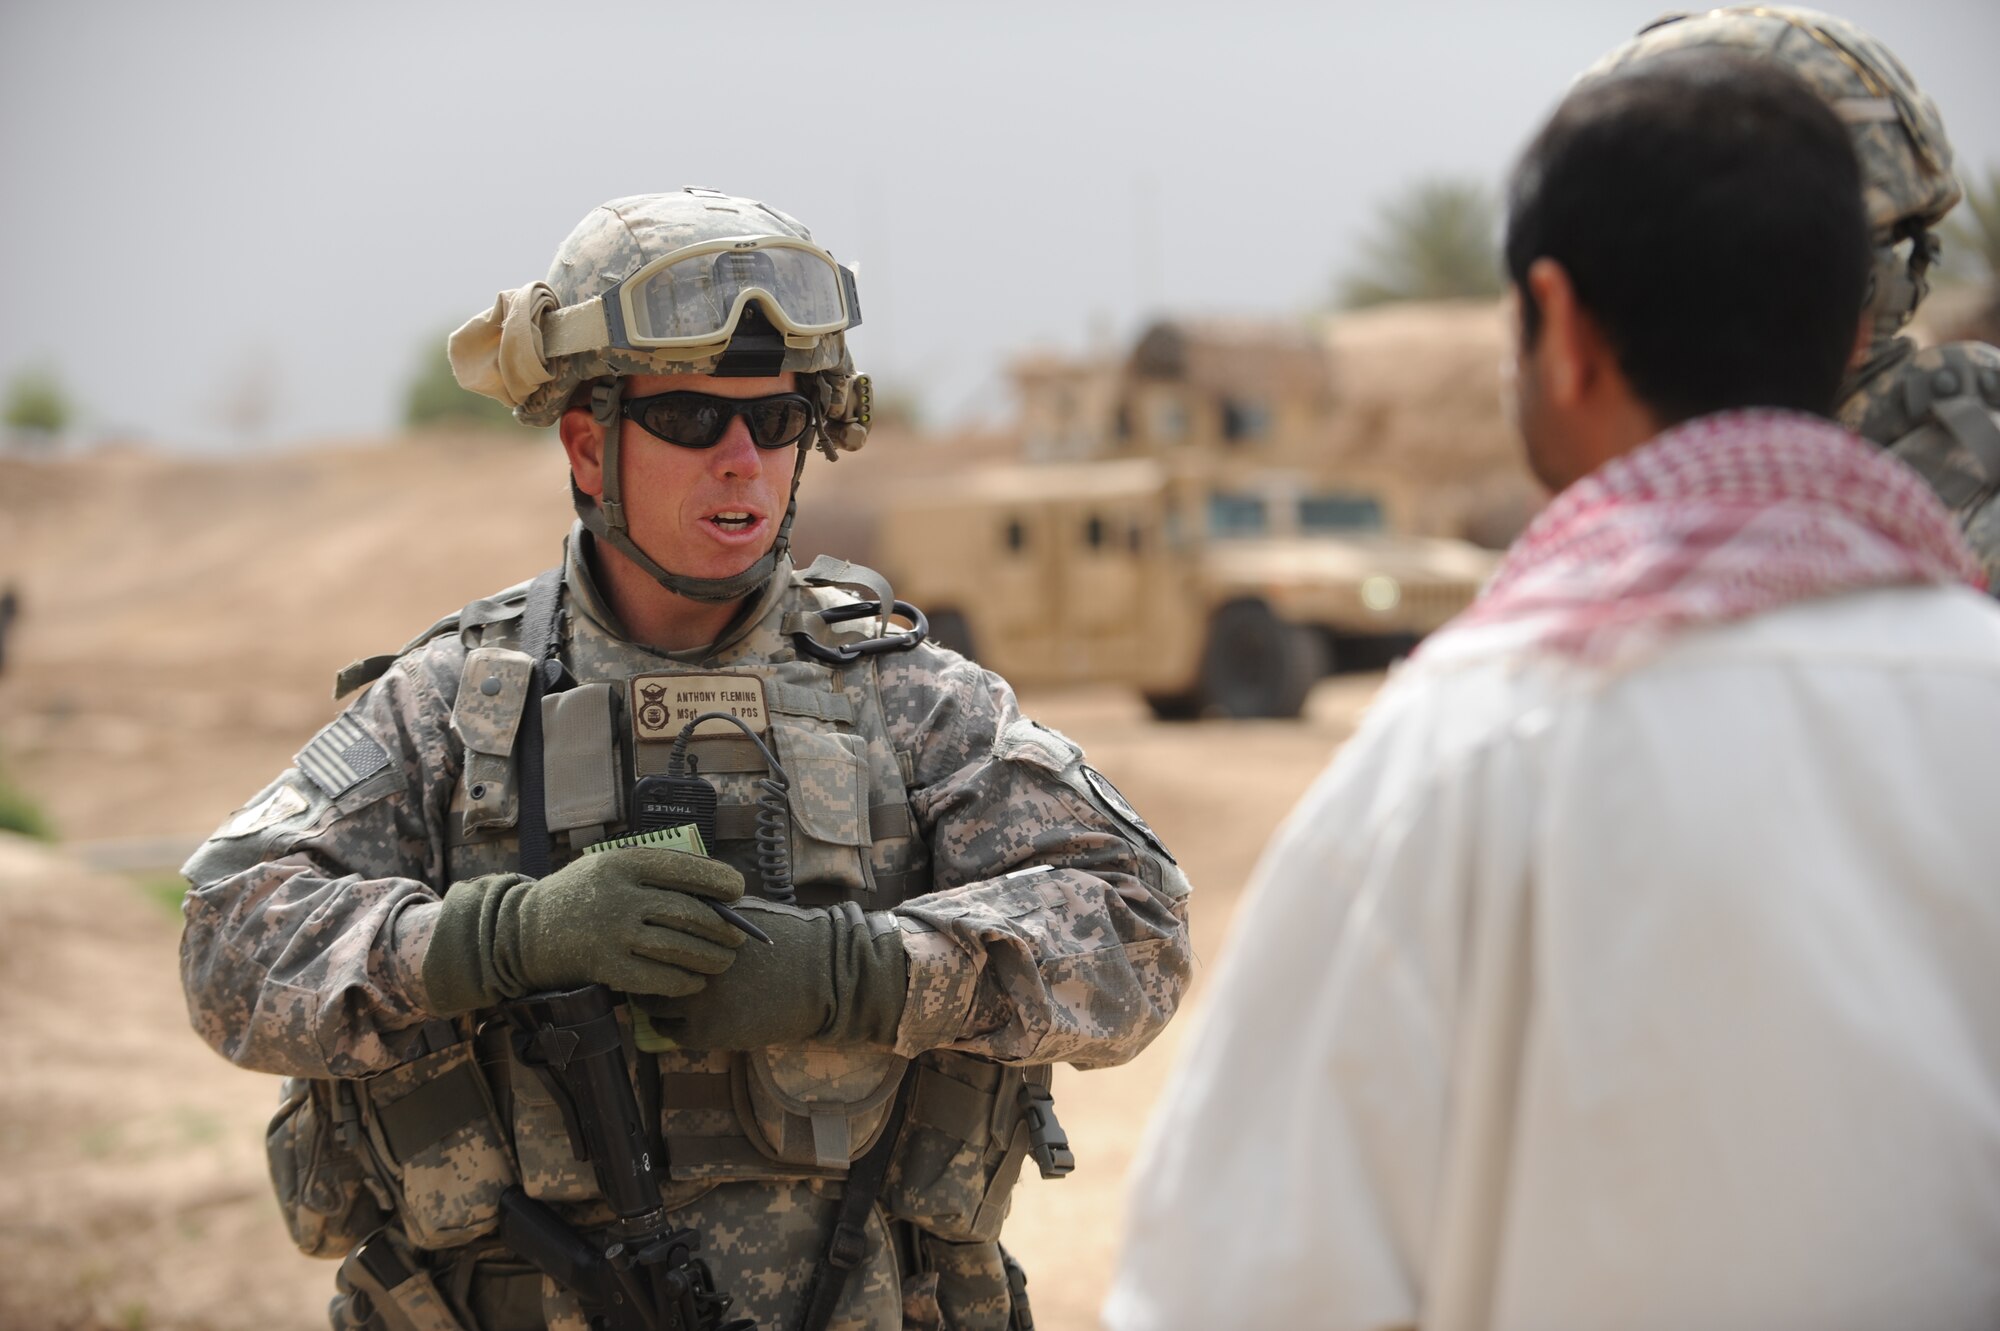 U.S. Air Force Master Sgt. Anthony Fleming, 532nd Expeditionary Security Forces Squadron, Joint Base Balad, Iraq, conducts an interview with and Iraqi villager from Bakr April 9, 2009, in support of Operation Iraqi Freedom.  (U.S. Air Force photo by Staff Sgt. James L. Harper Jr.)